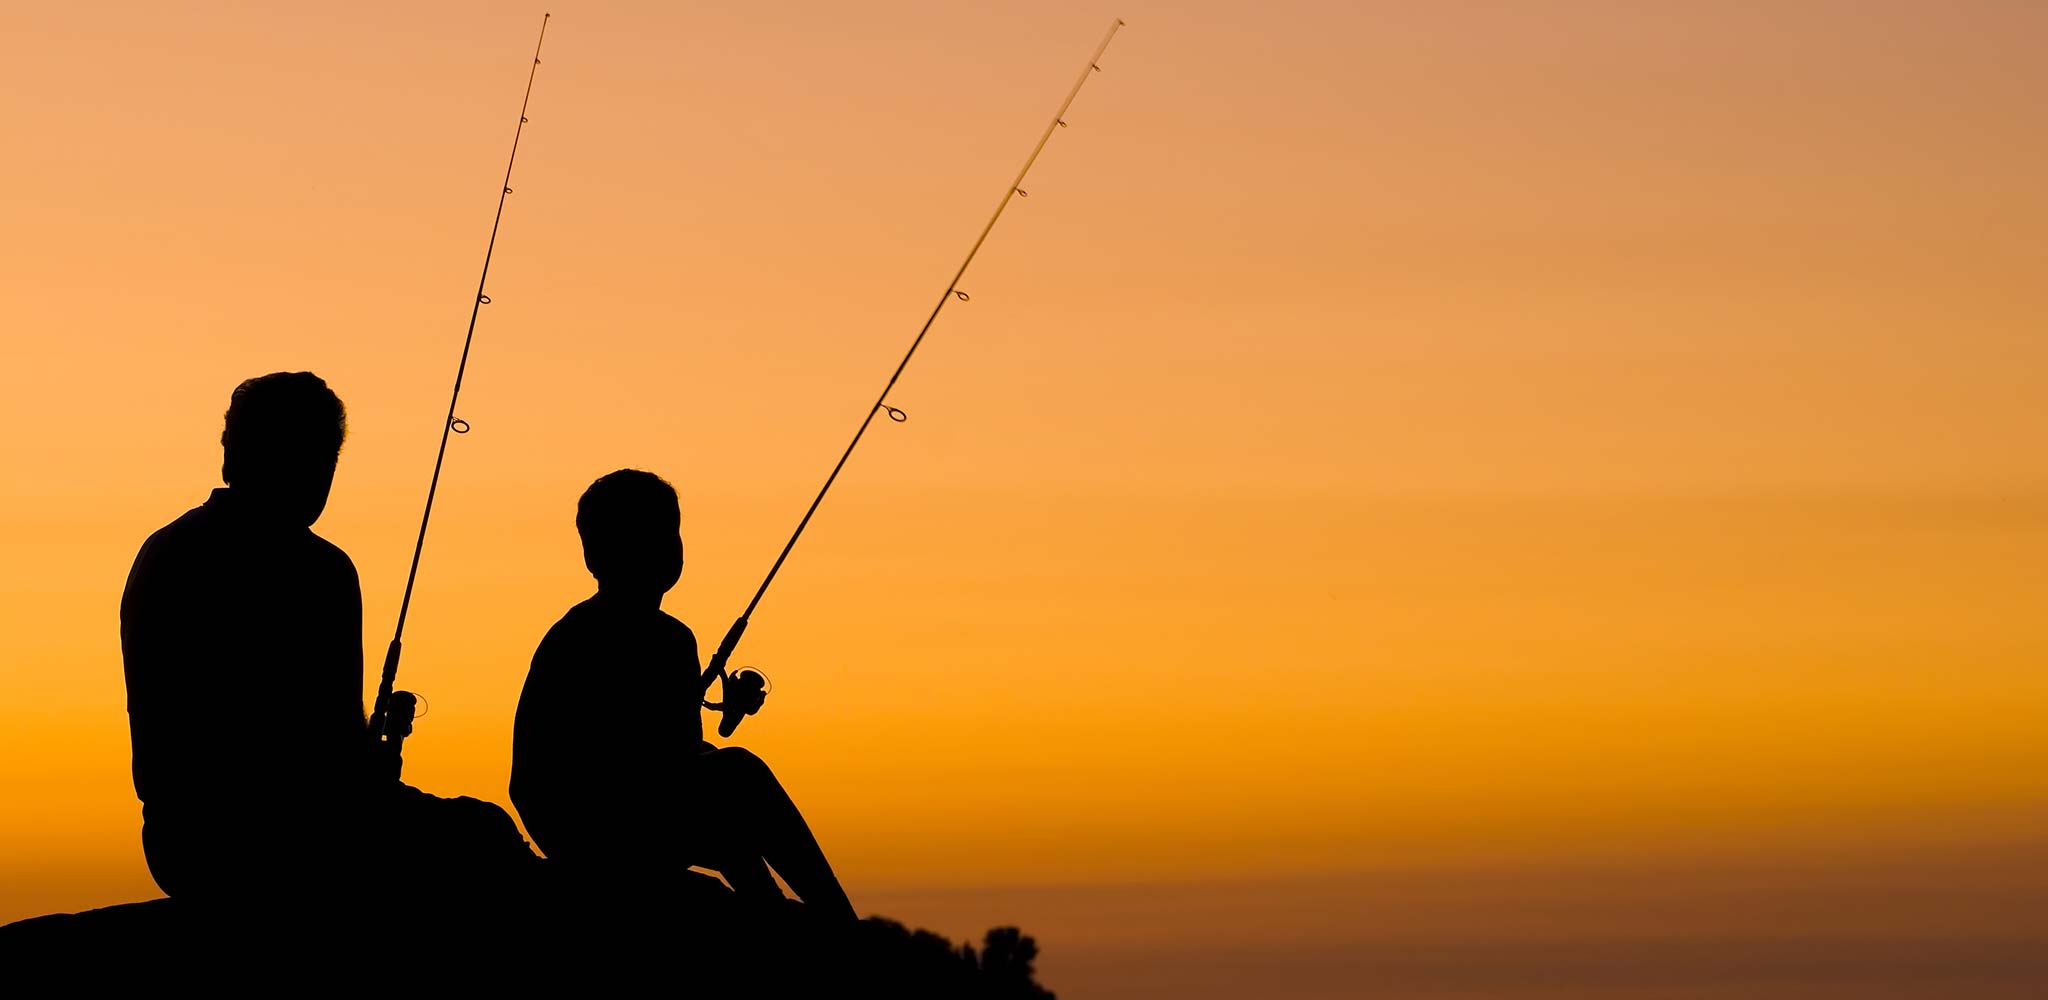 Artistic Silhouette Loving Grandfather Fishing With Happy Grandson Peacefully At Sunset Sharing Time Together Creating Memories